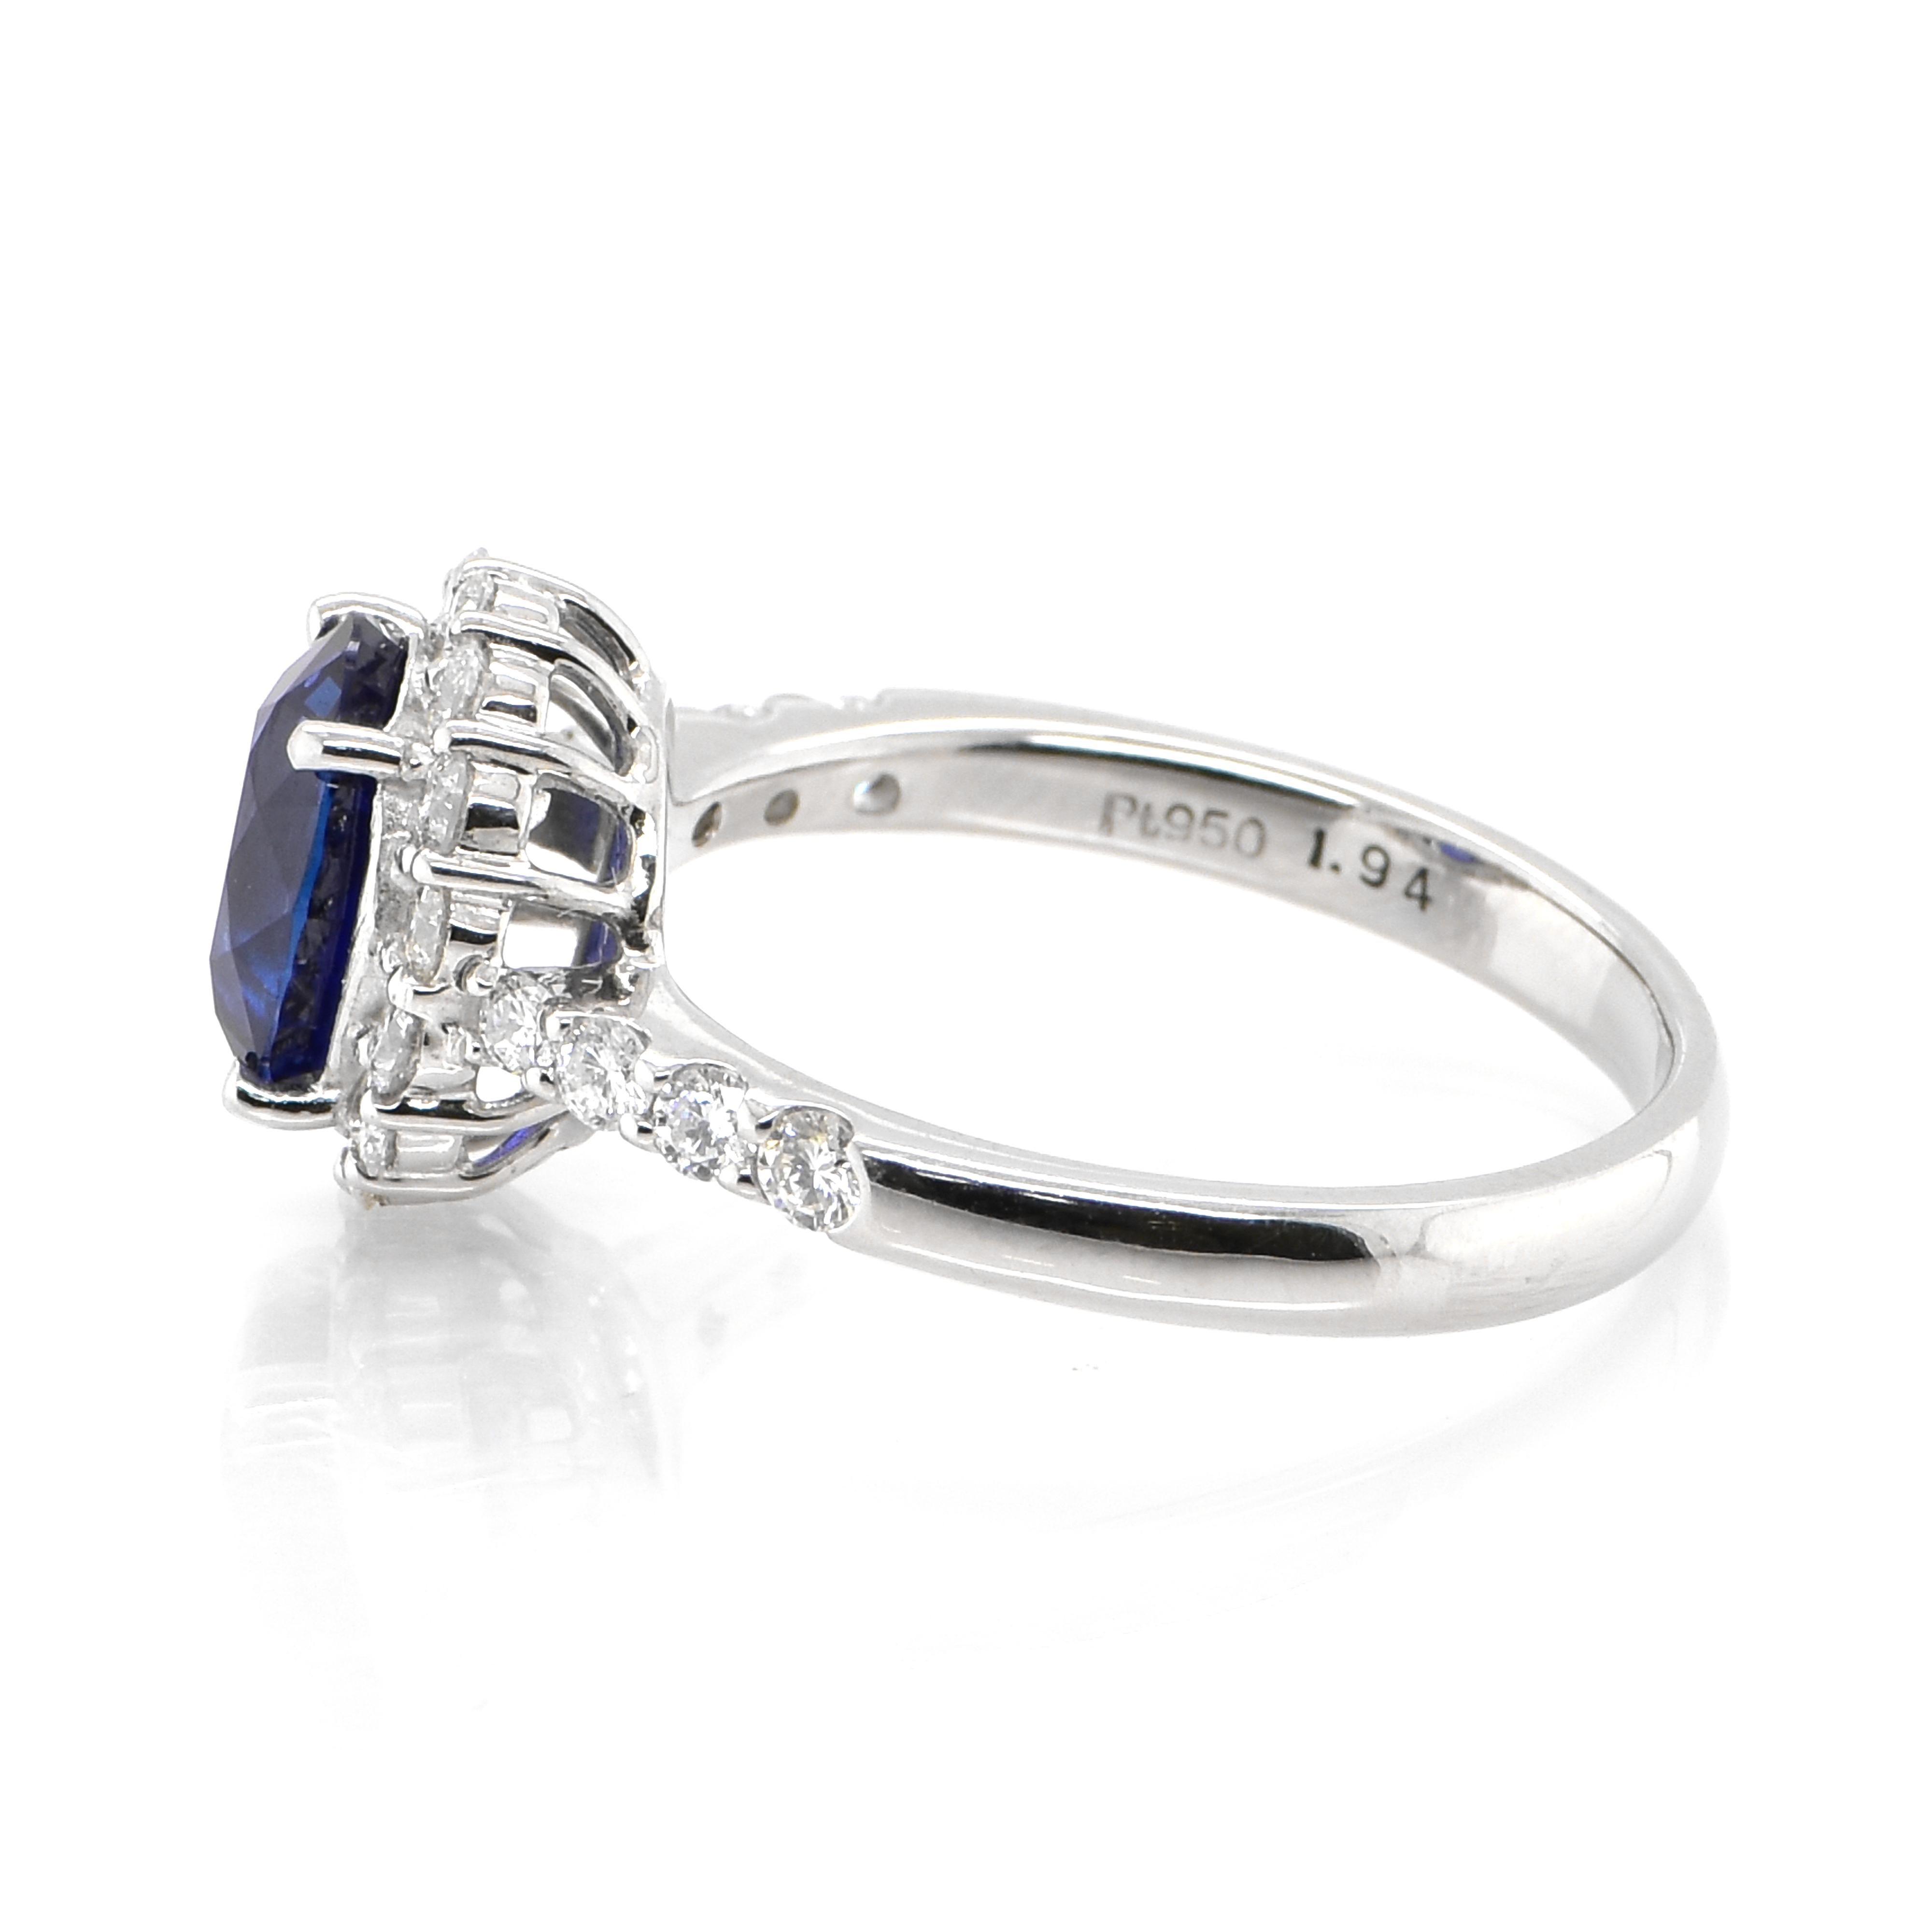 Oval Cut 1.92 Carat Natural Royal Blue Sapphire and Diamond Halo Ring Made in Platinum For Sale